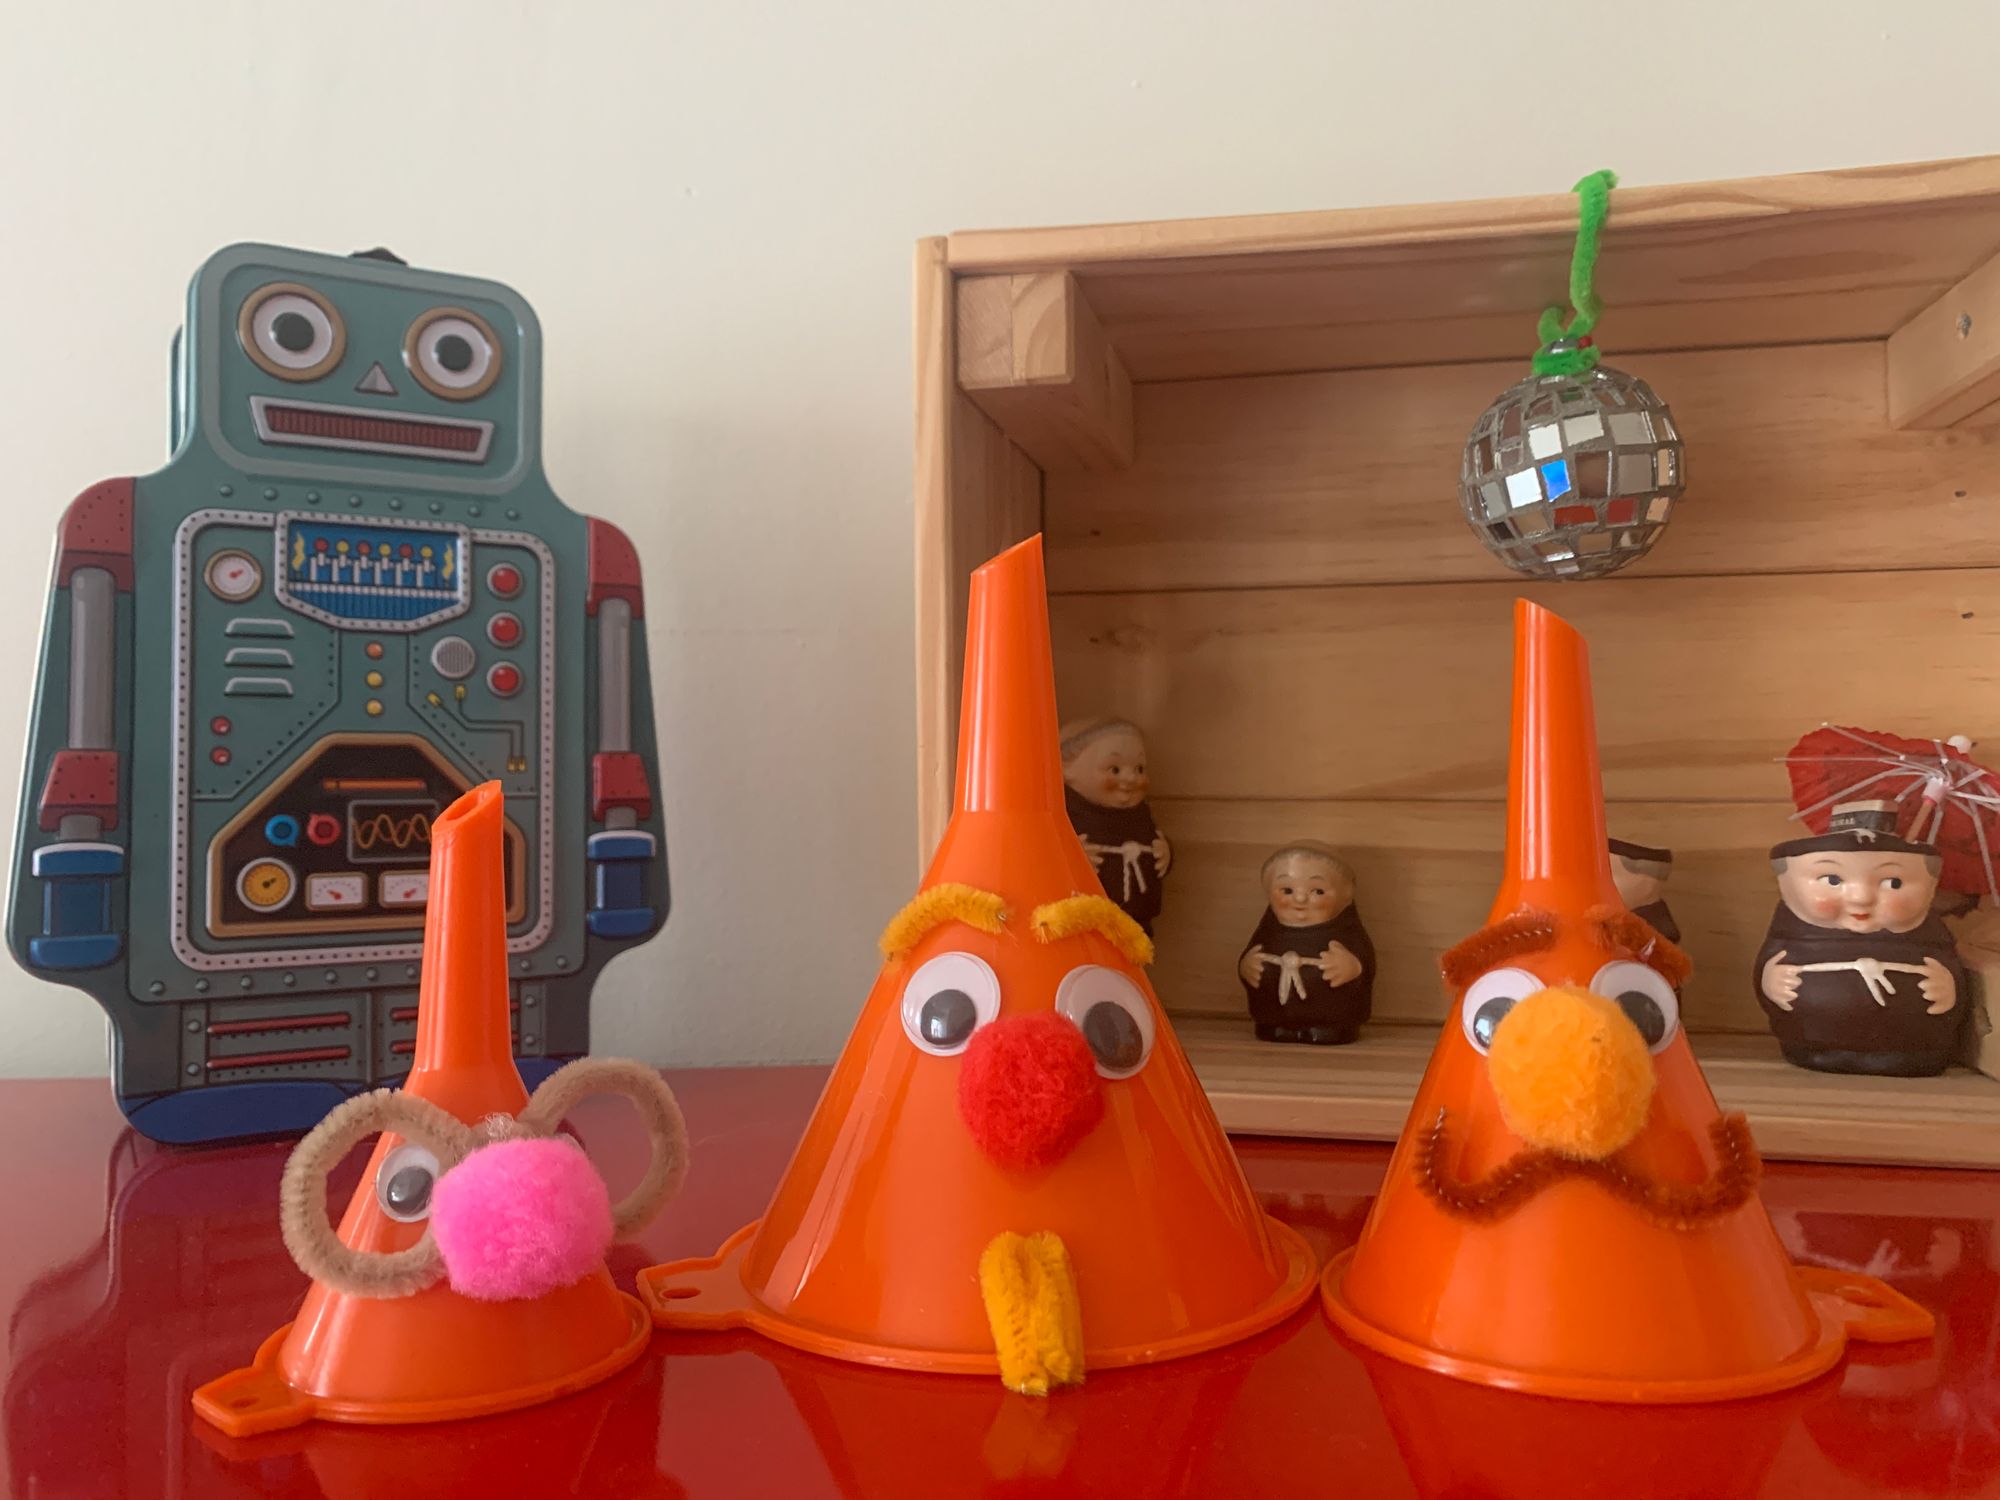 Three funnels upside down decorated with googly eyes, pom-poms, and pipe cleaners to look like people. Behind them is a lunch box robot and a small diorama in a crate with a bunch of small ceramic friars and a disco ball.